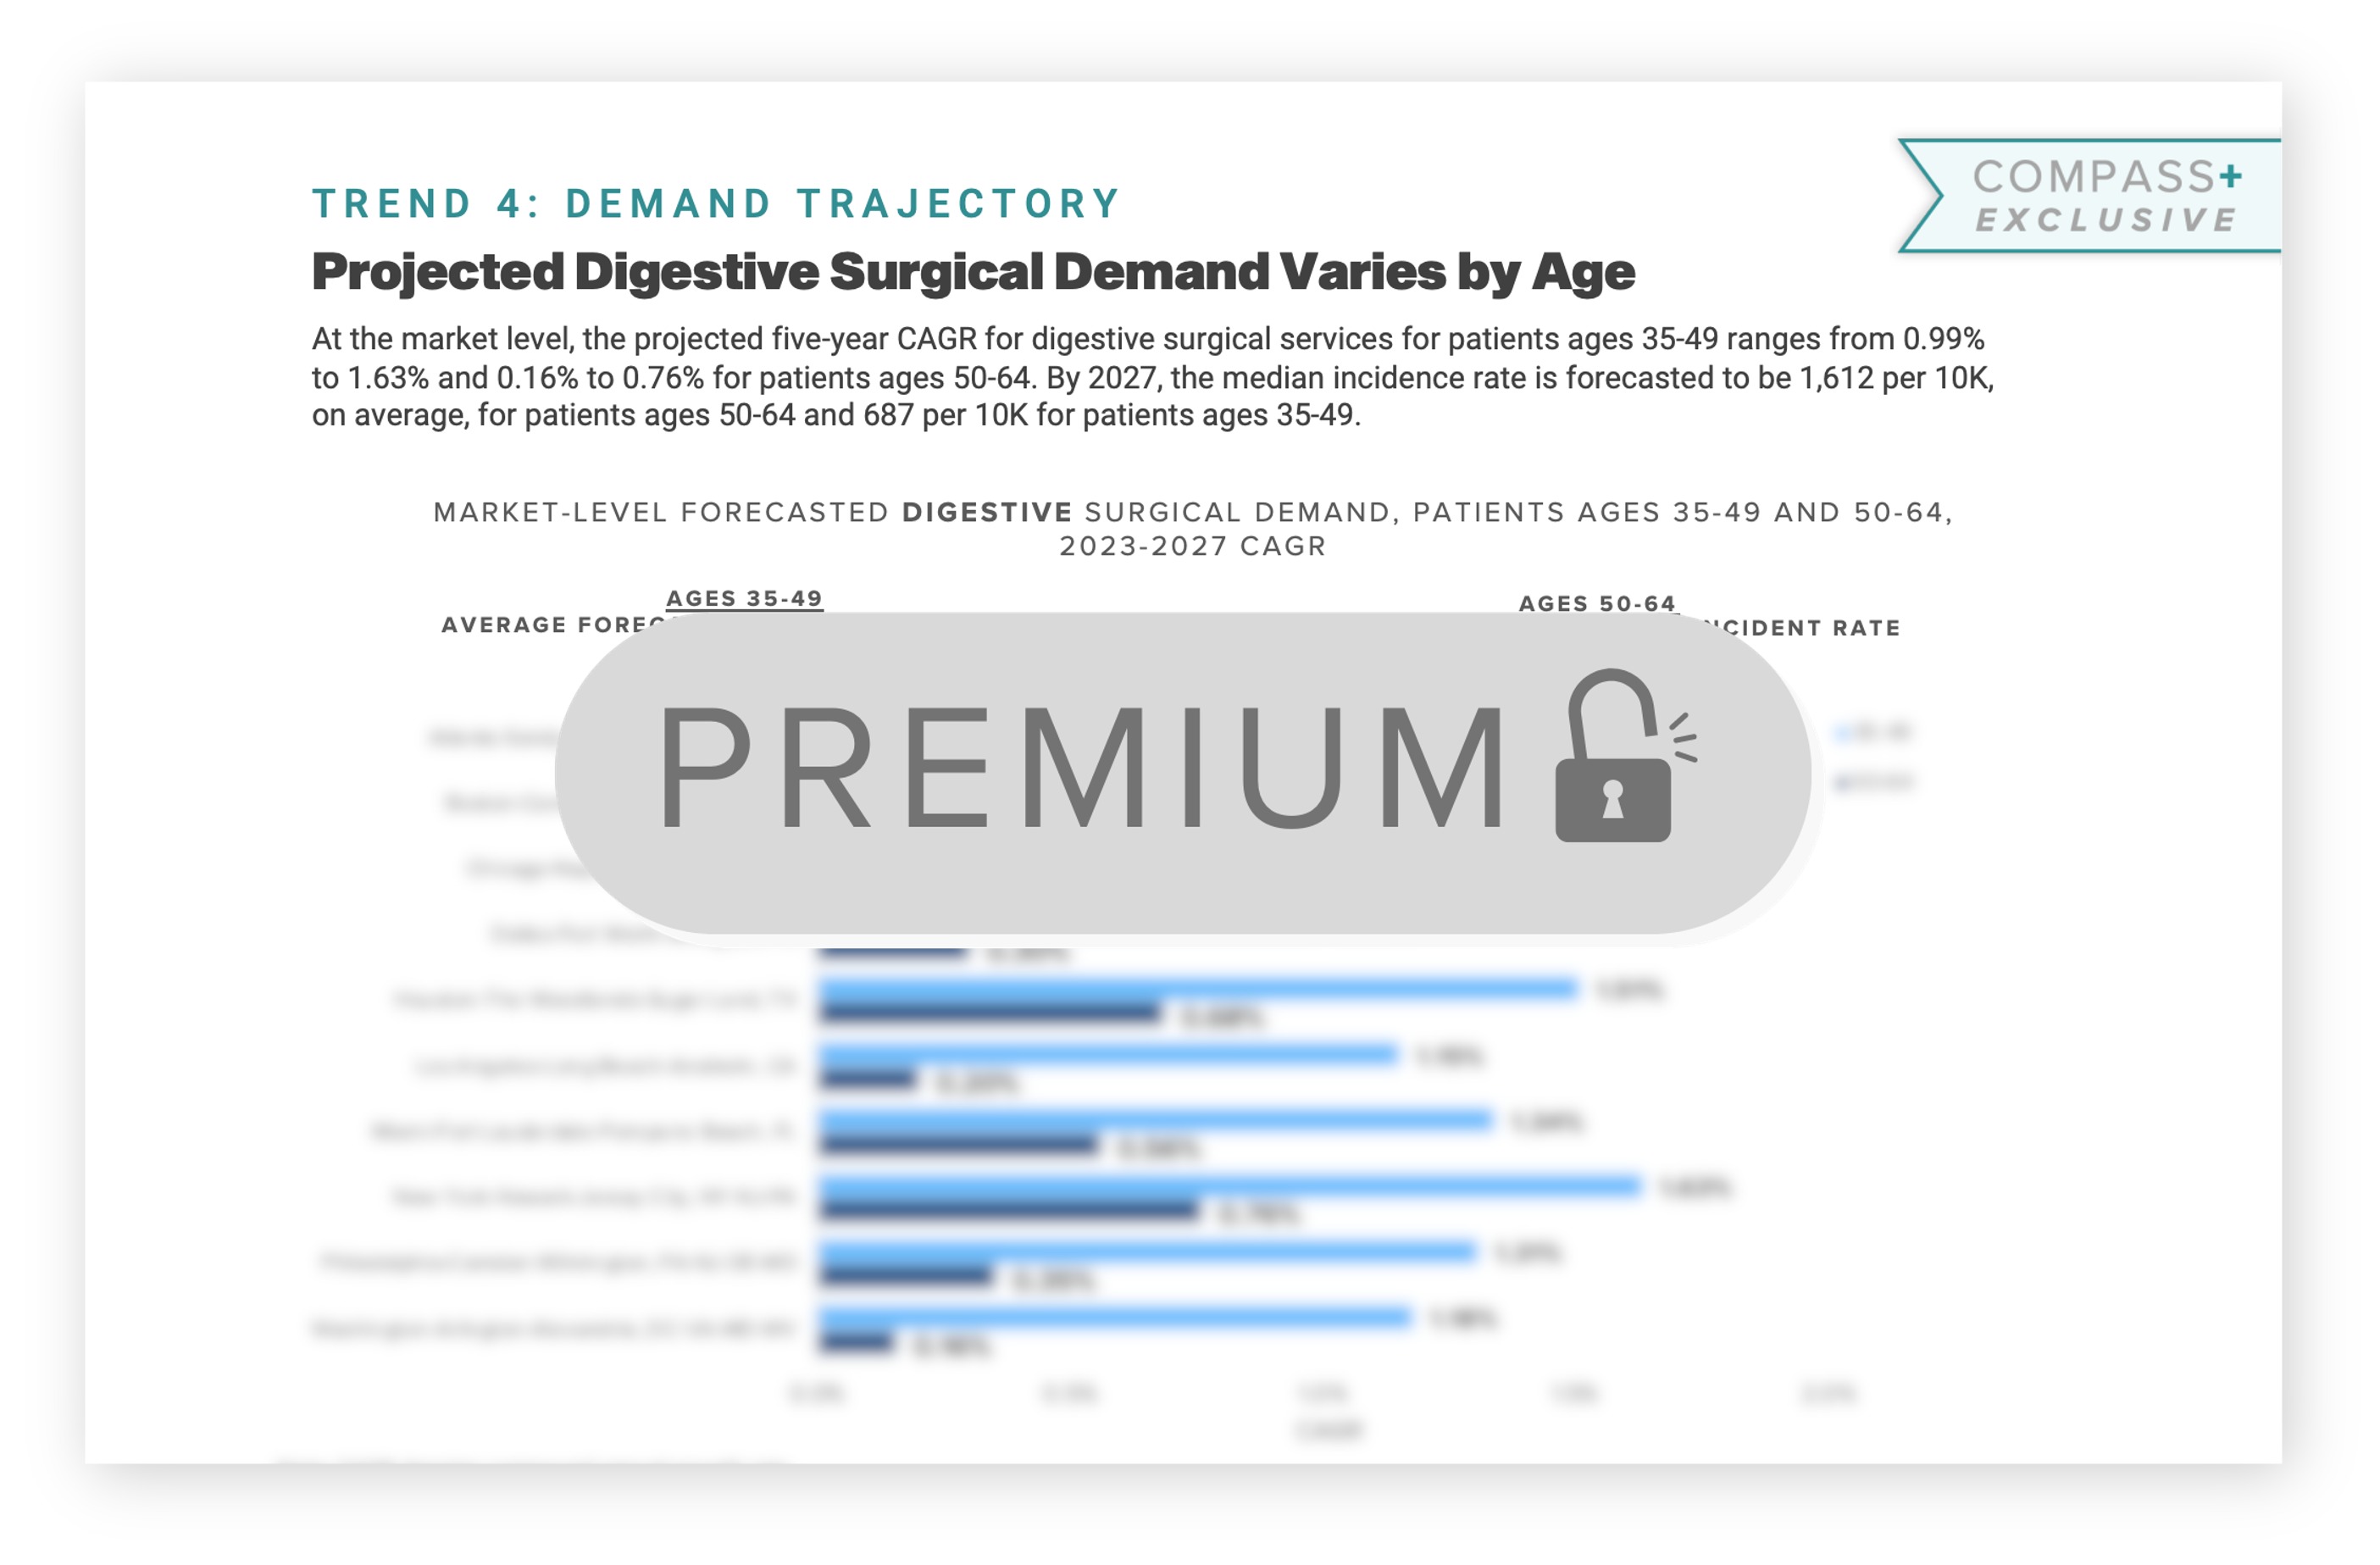 Projected Digestive Surgical Demand Varies by Age